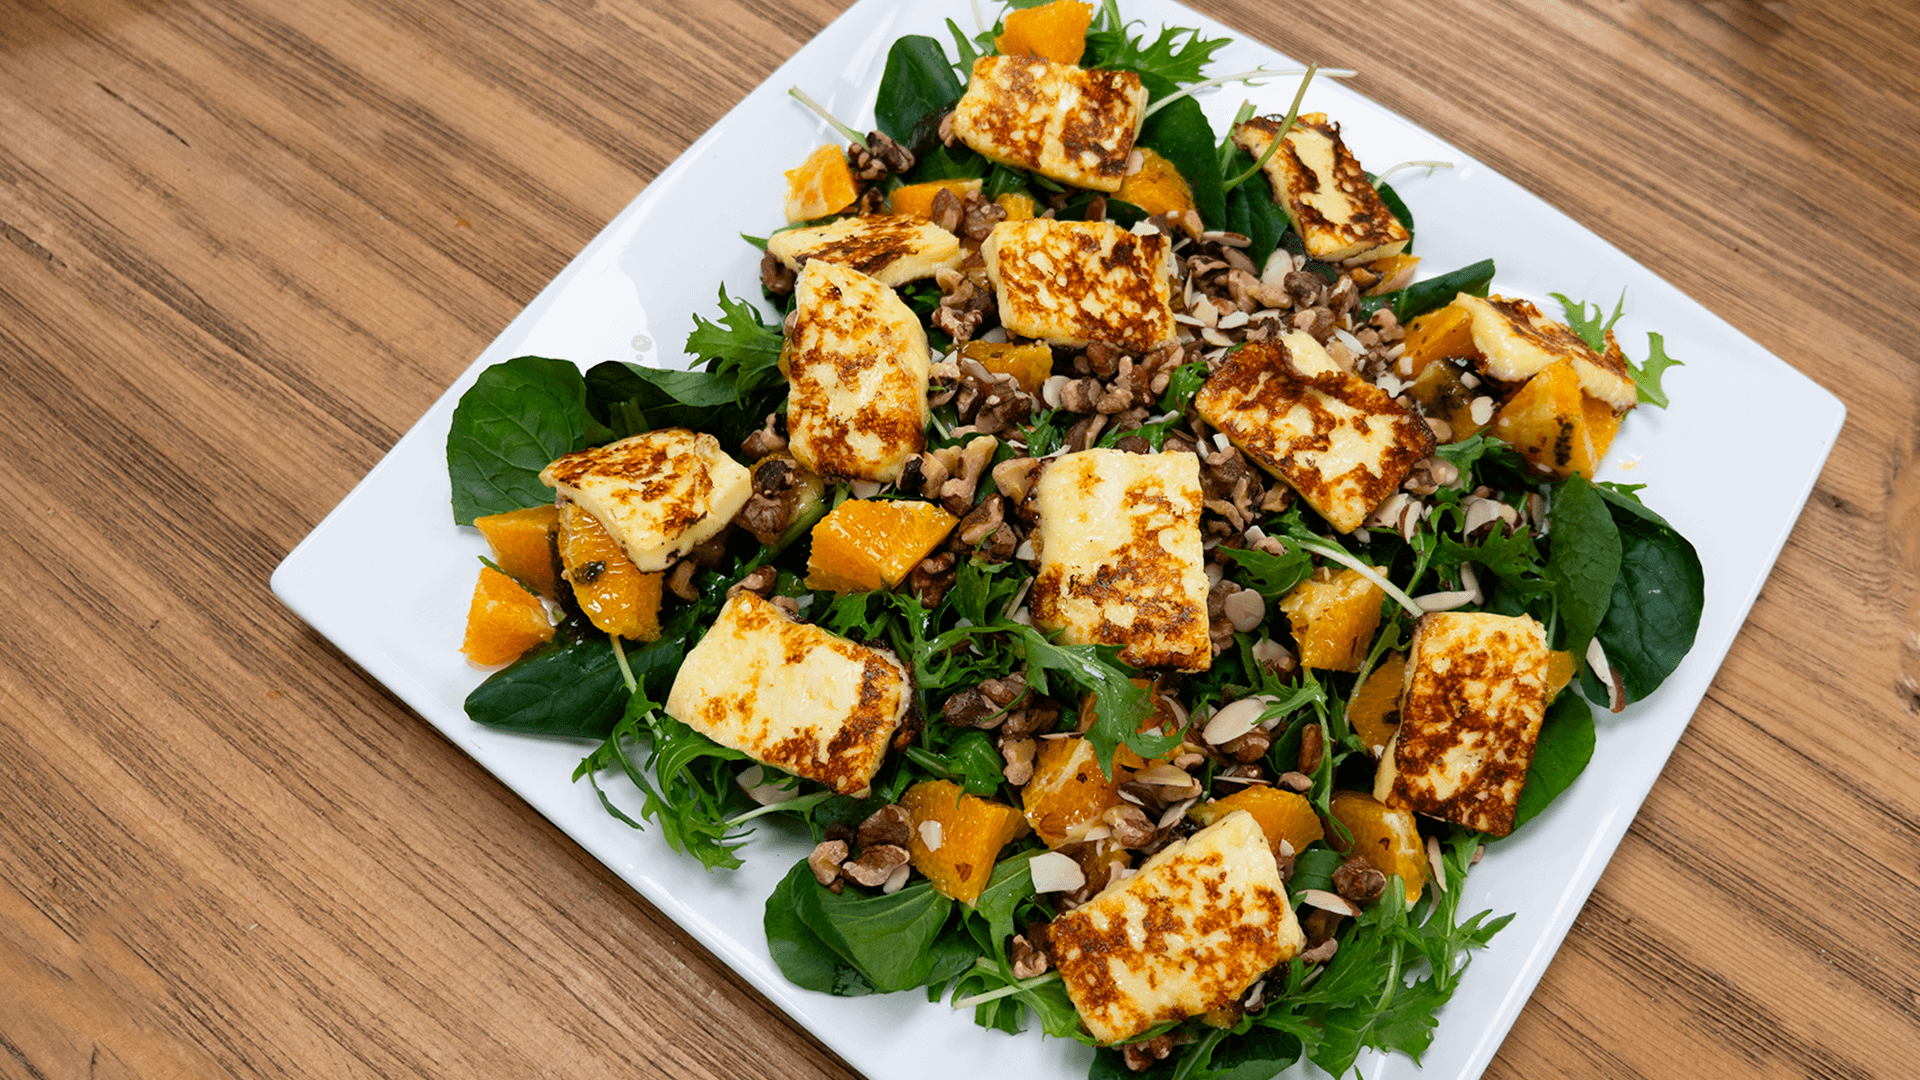 A white square plate sits on a wooden table, heaped with a Halloumi, rocket and orange salad covered in toasted walnuts.